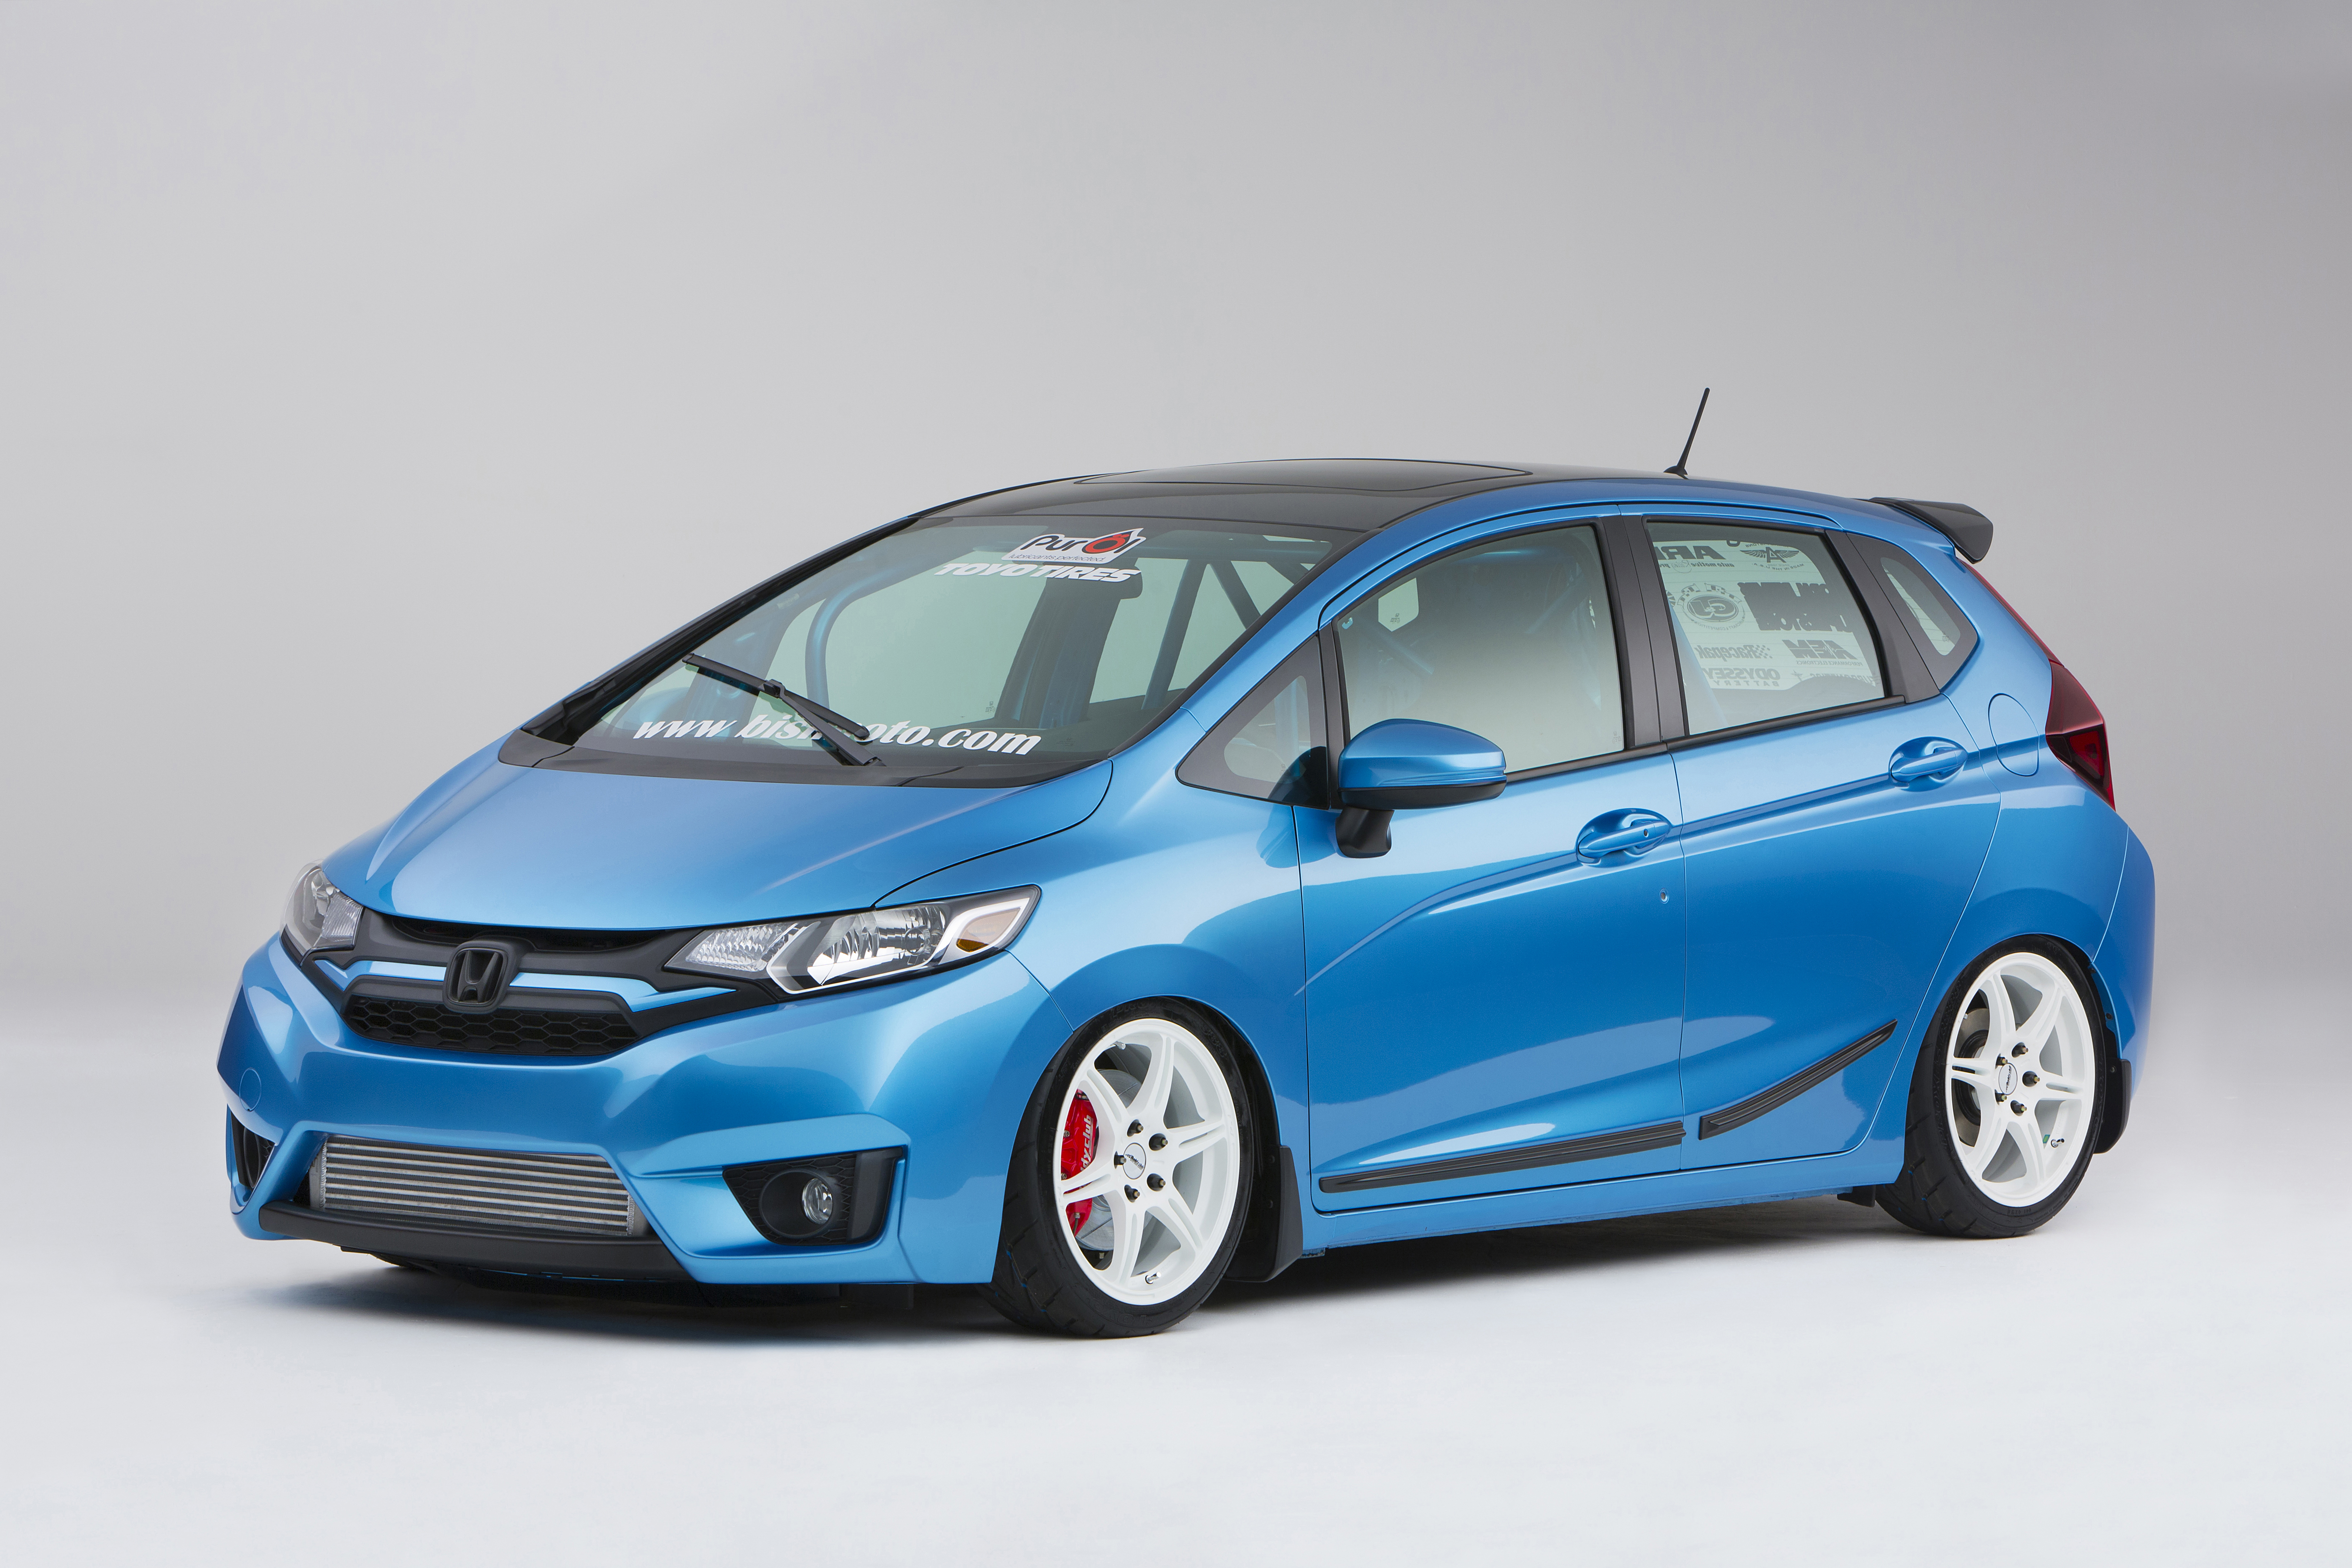 Honda fit 2015. Honda Fit/Jazz. Honda Fit 2015 Tuning. Honda Fit 2014 Tuning.